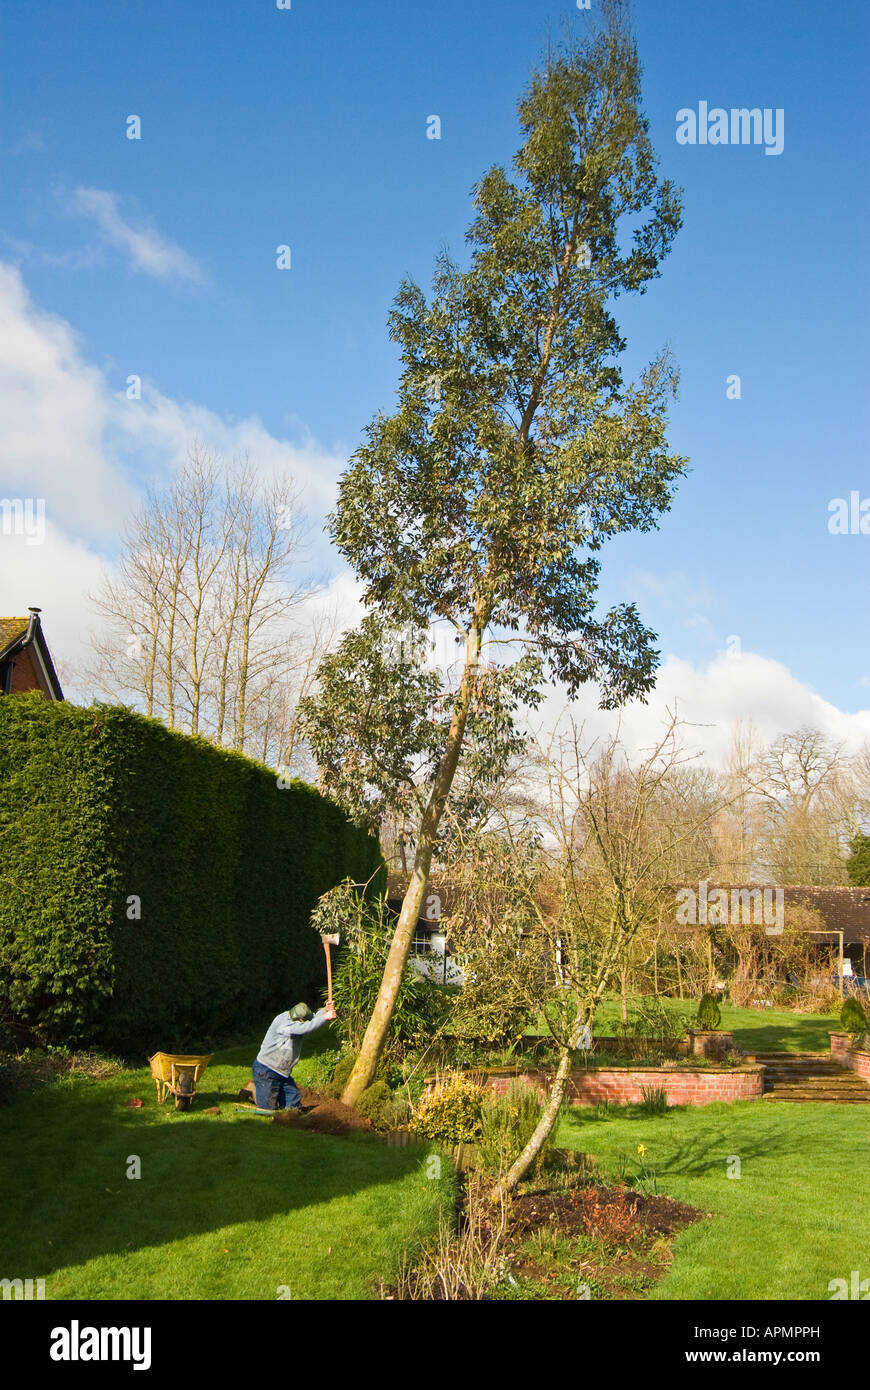 Felling storm damaged eucalyptus tree before garden accident occurs in Wiltshire England UK EU Stock Photo